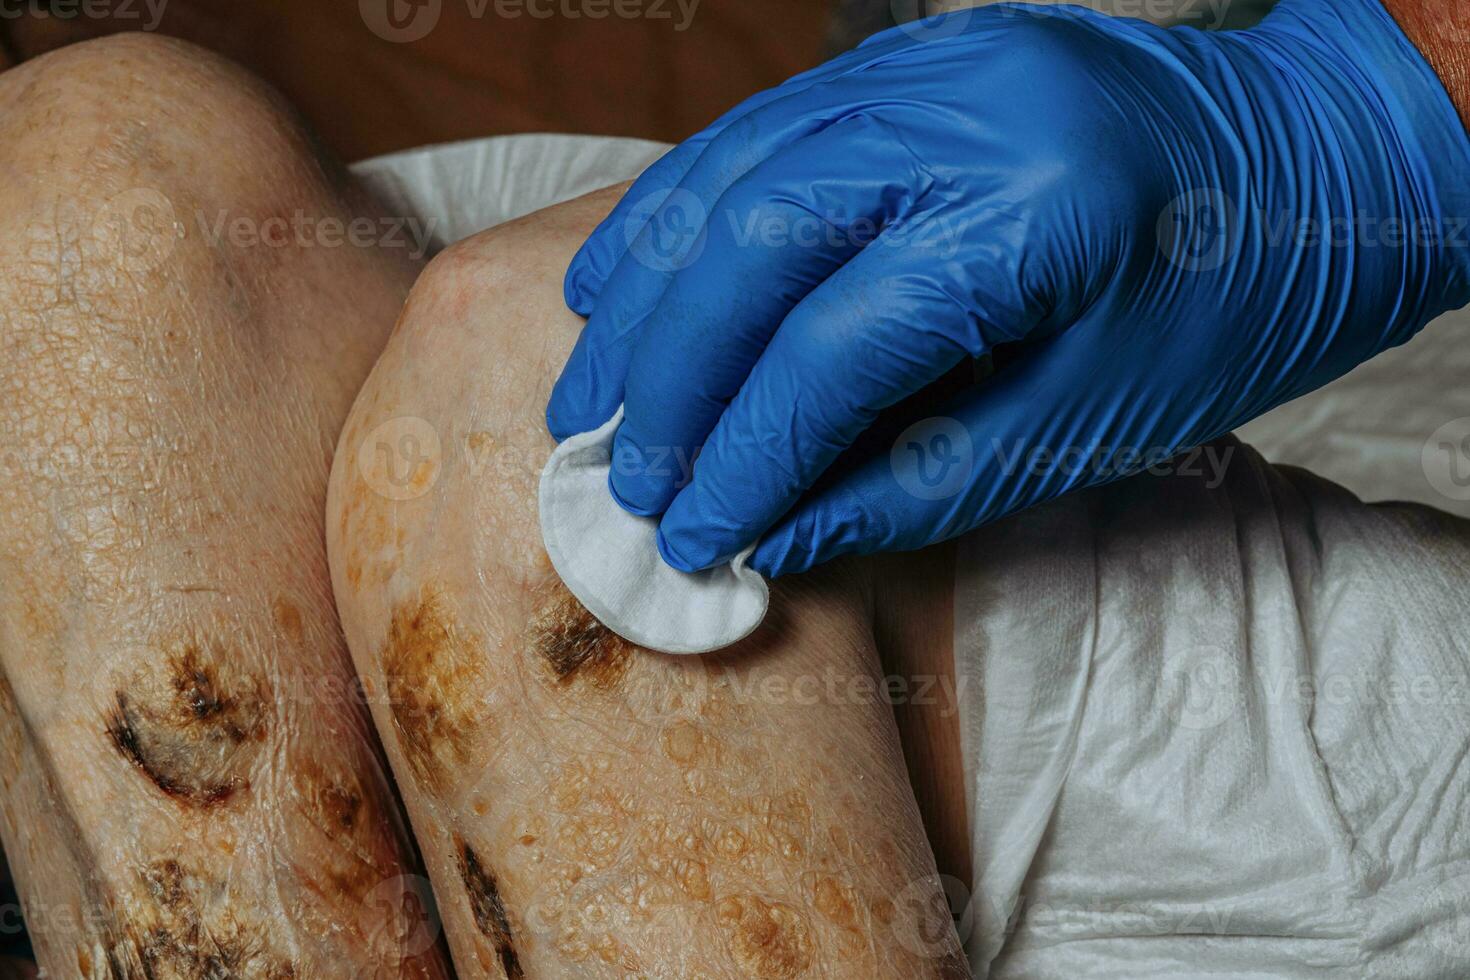 Skin lesions on the leg. Symptoms characteristic of the elderly begin with a red rash in a small circle and spread to a wider area. Large scabs on the legs. Elderly care. Consequences of diabetes photo